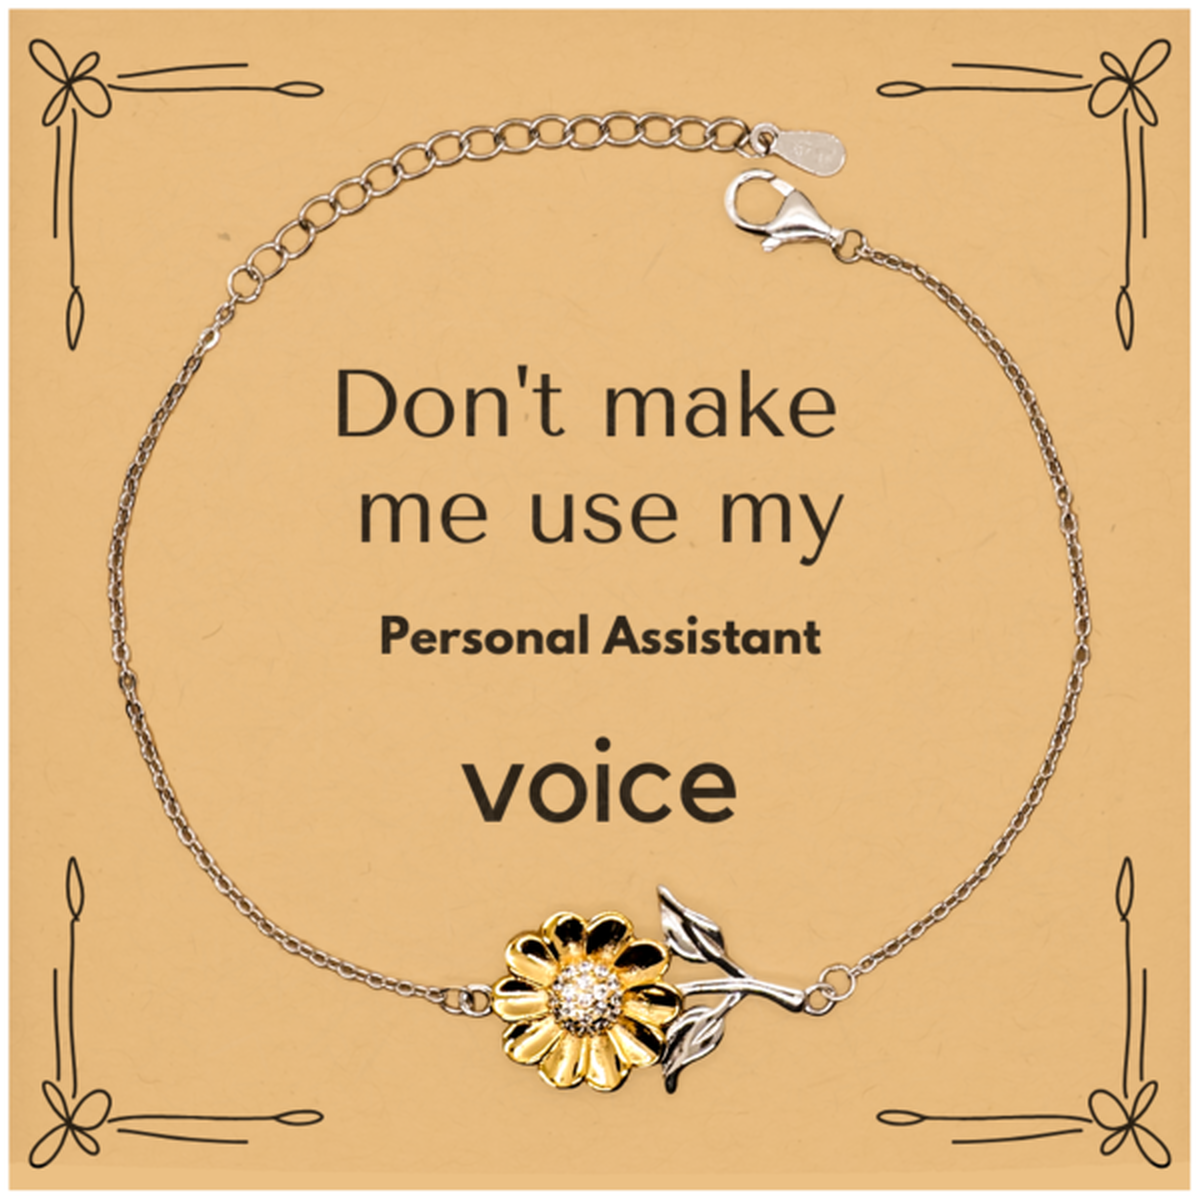 Don't make me use my Personal Assistant voice, Sarcasm Personal Assistant Card Gifts, Christmas Personal Assistant Sunflower Bracelet Birthday Unique Gifts For Personal Assistant Coworkers, Men, Women, Colleague, Friends